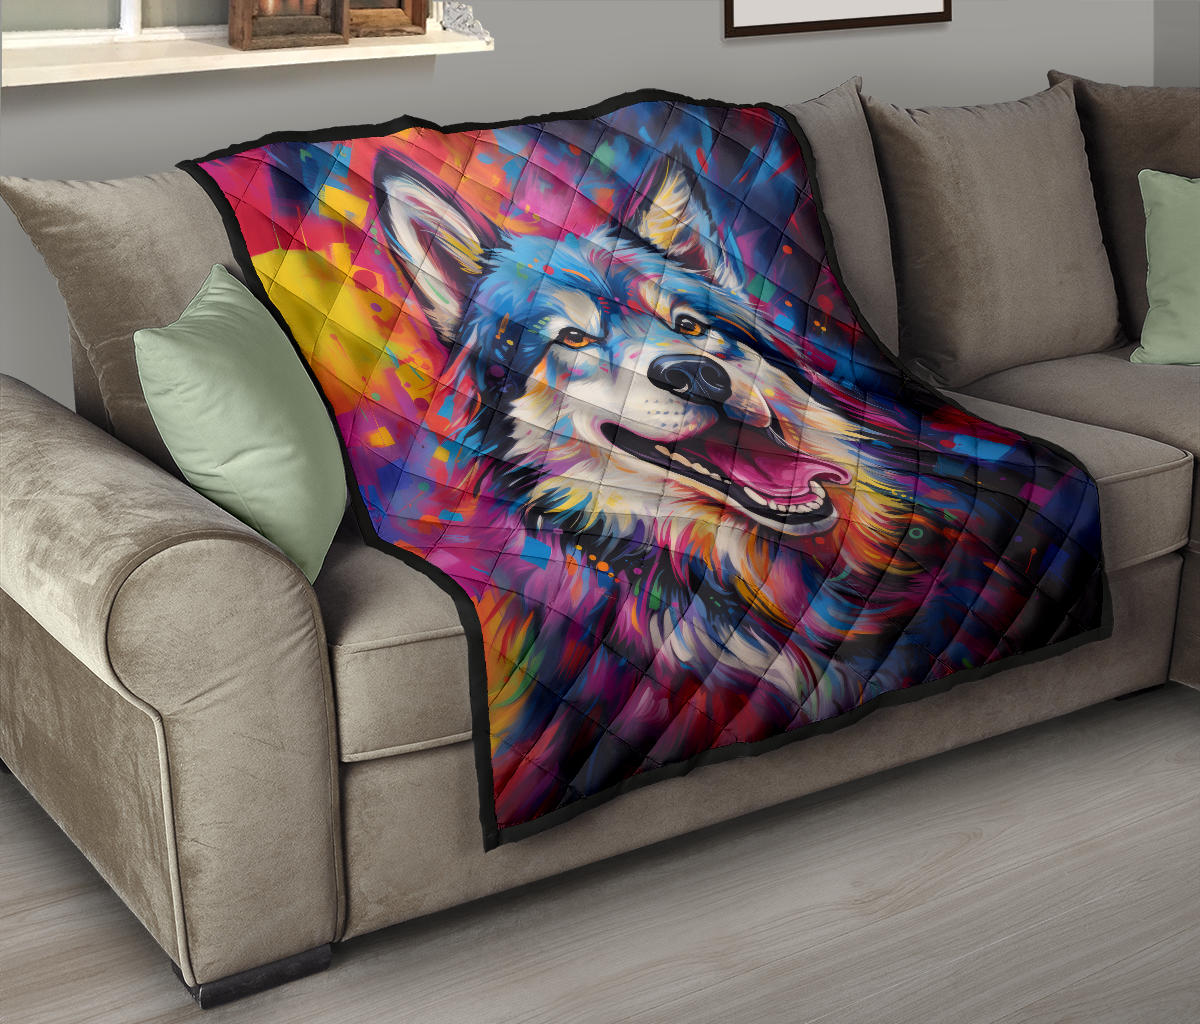 Alaskan Malamute Design Handcrafted Quilt - Inspired 2023 Collection